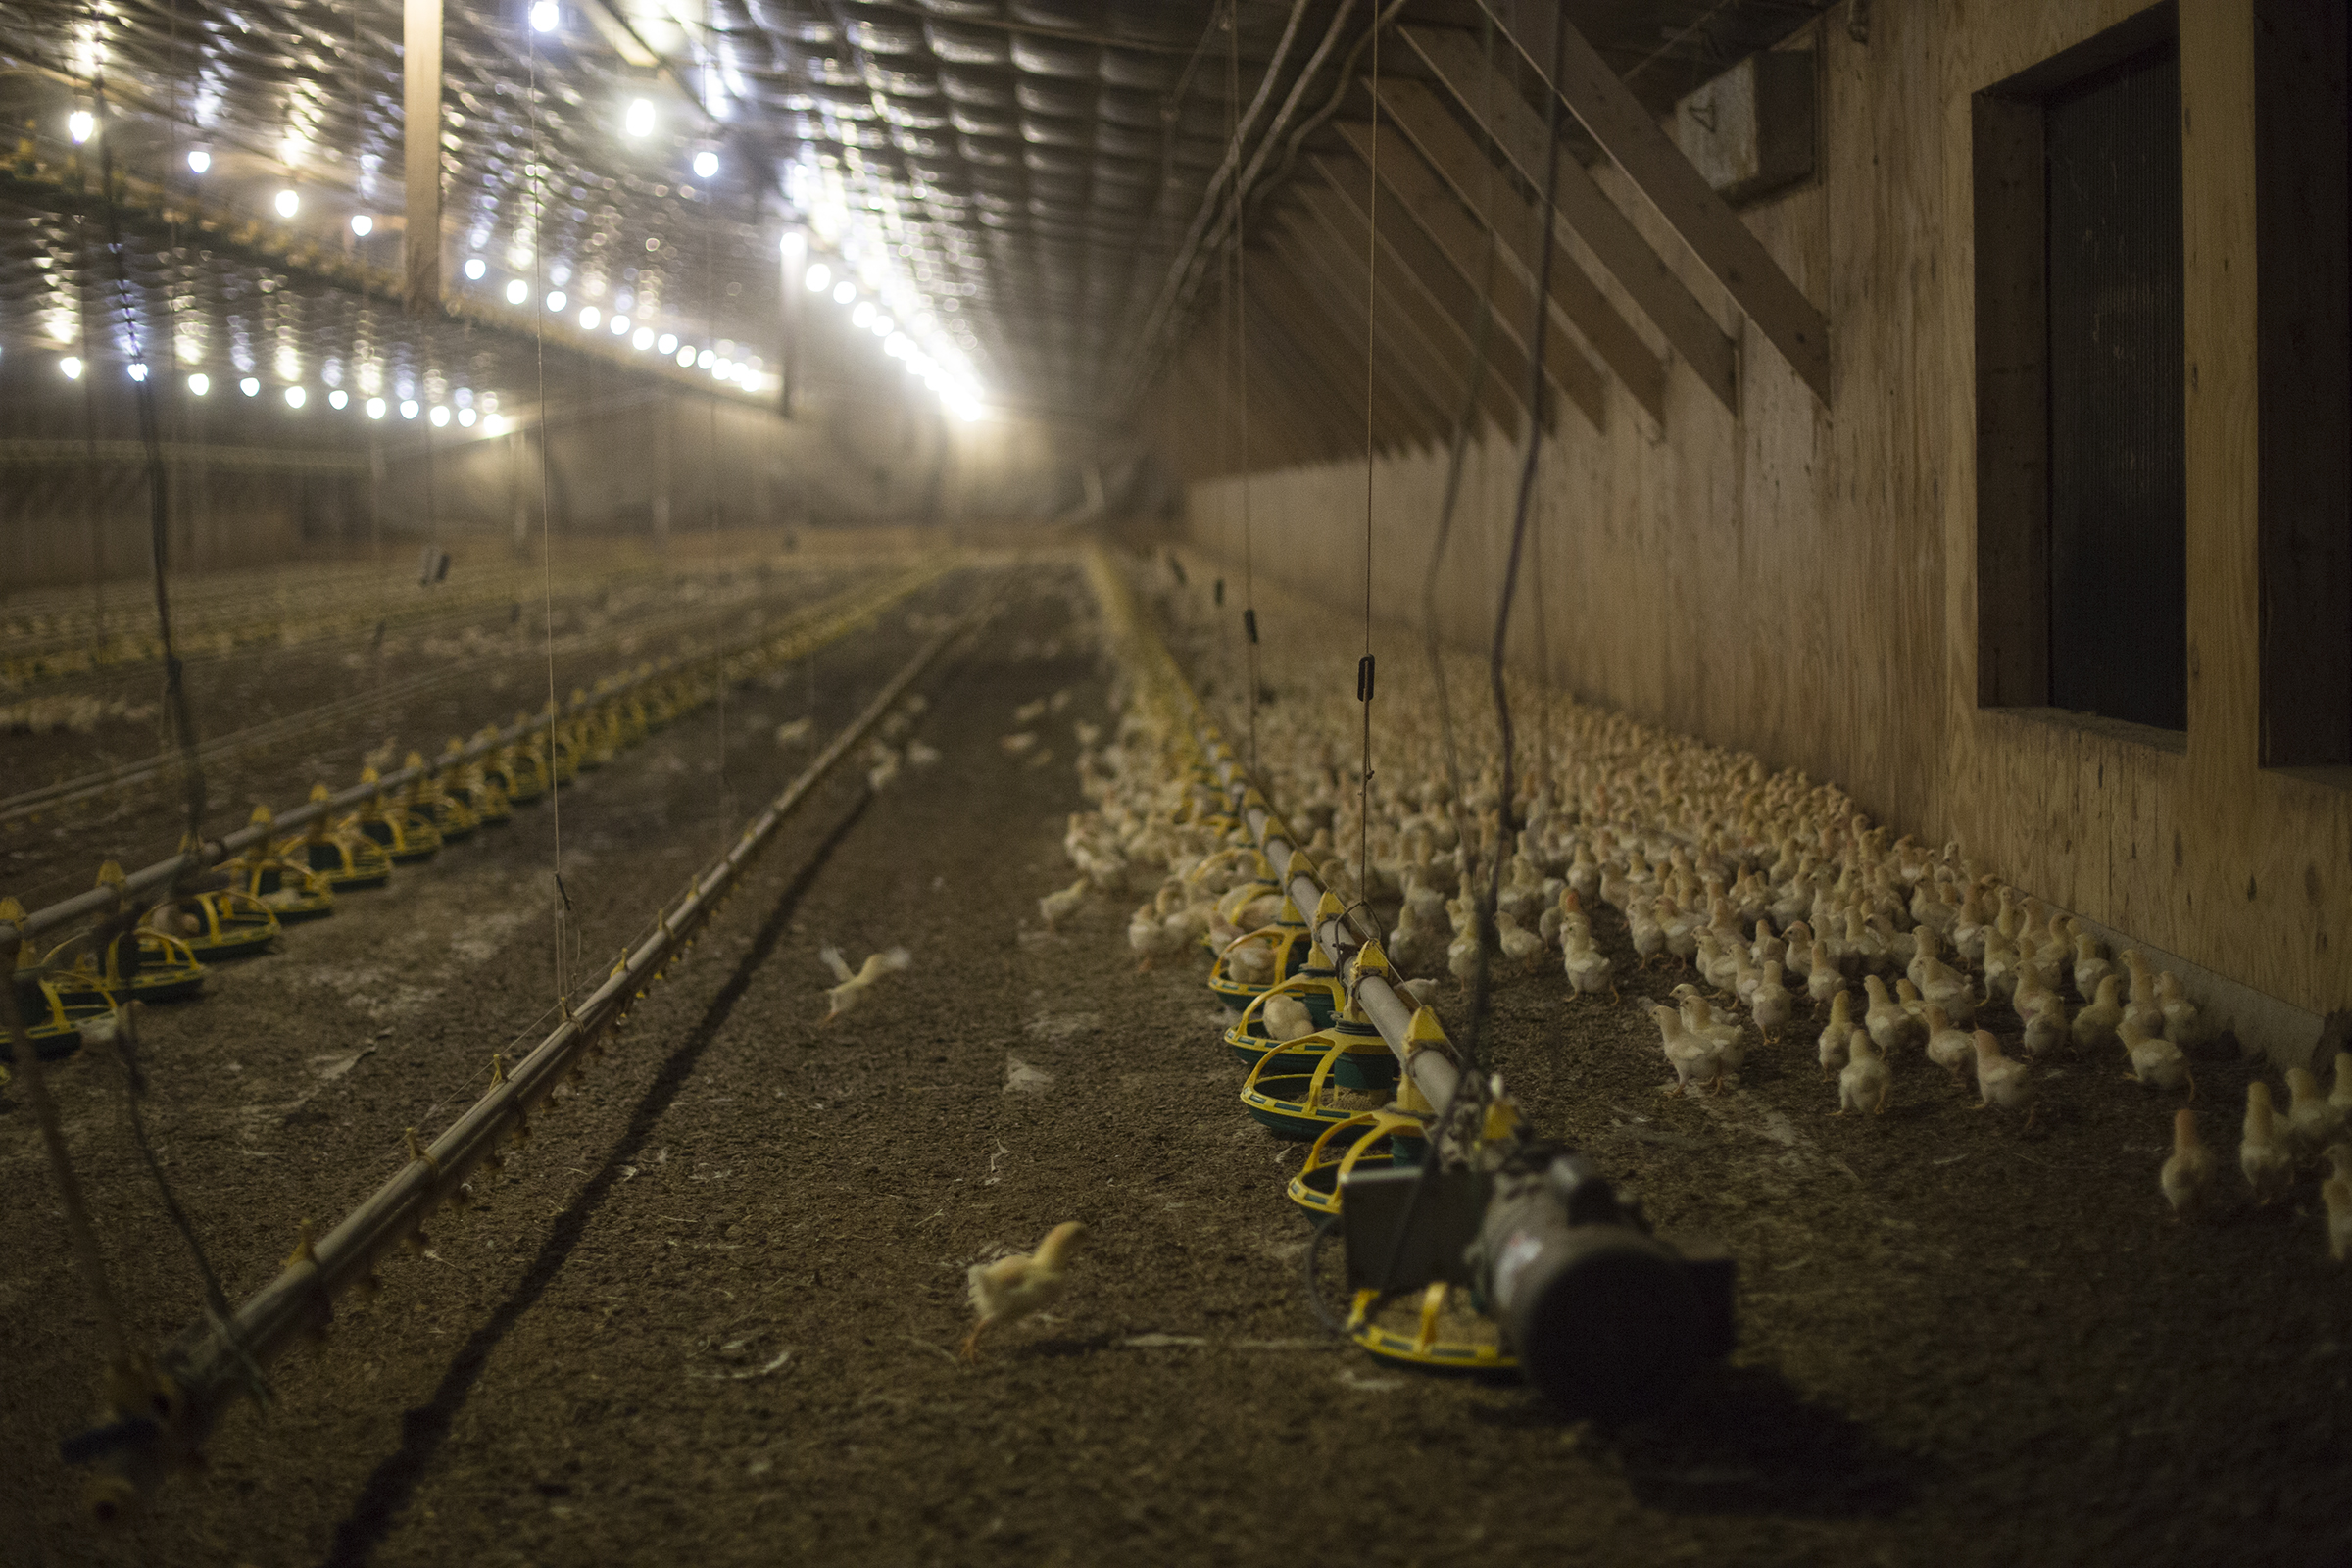 Chickens gather in one of the four chicken houses on Millennium Farms in Pocomoke City, Maryland. The farm currently has about 80,000 chickens, according to owner Jason Lambertson. Capital News Service Photo by James Levin.